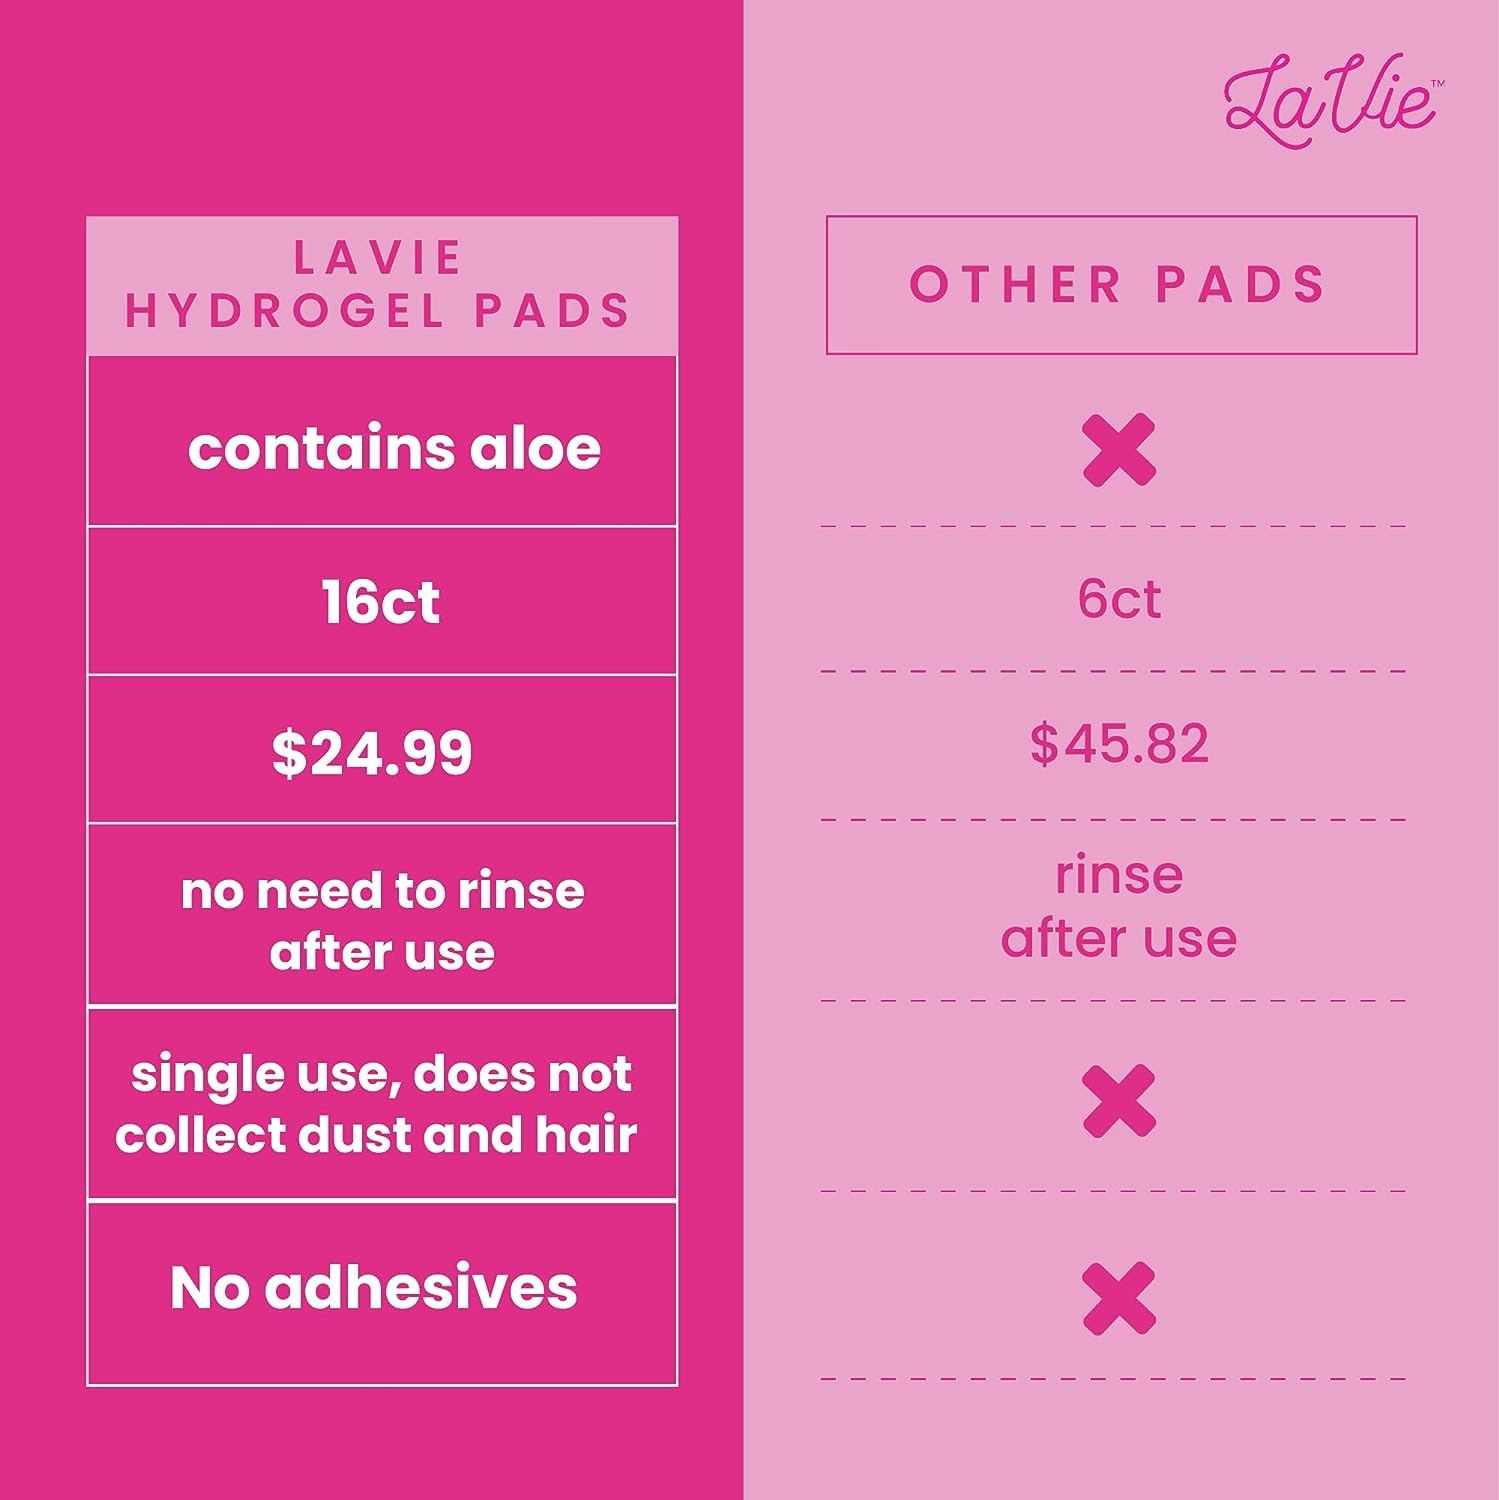 yay! So glad you love them! Hydrogel nipple pads are a